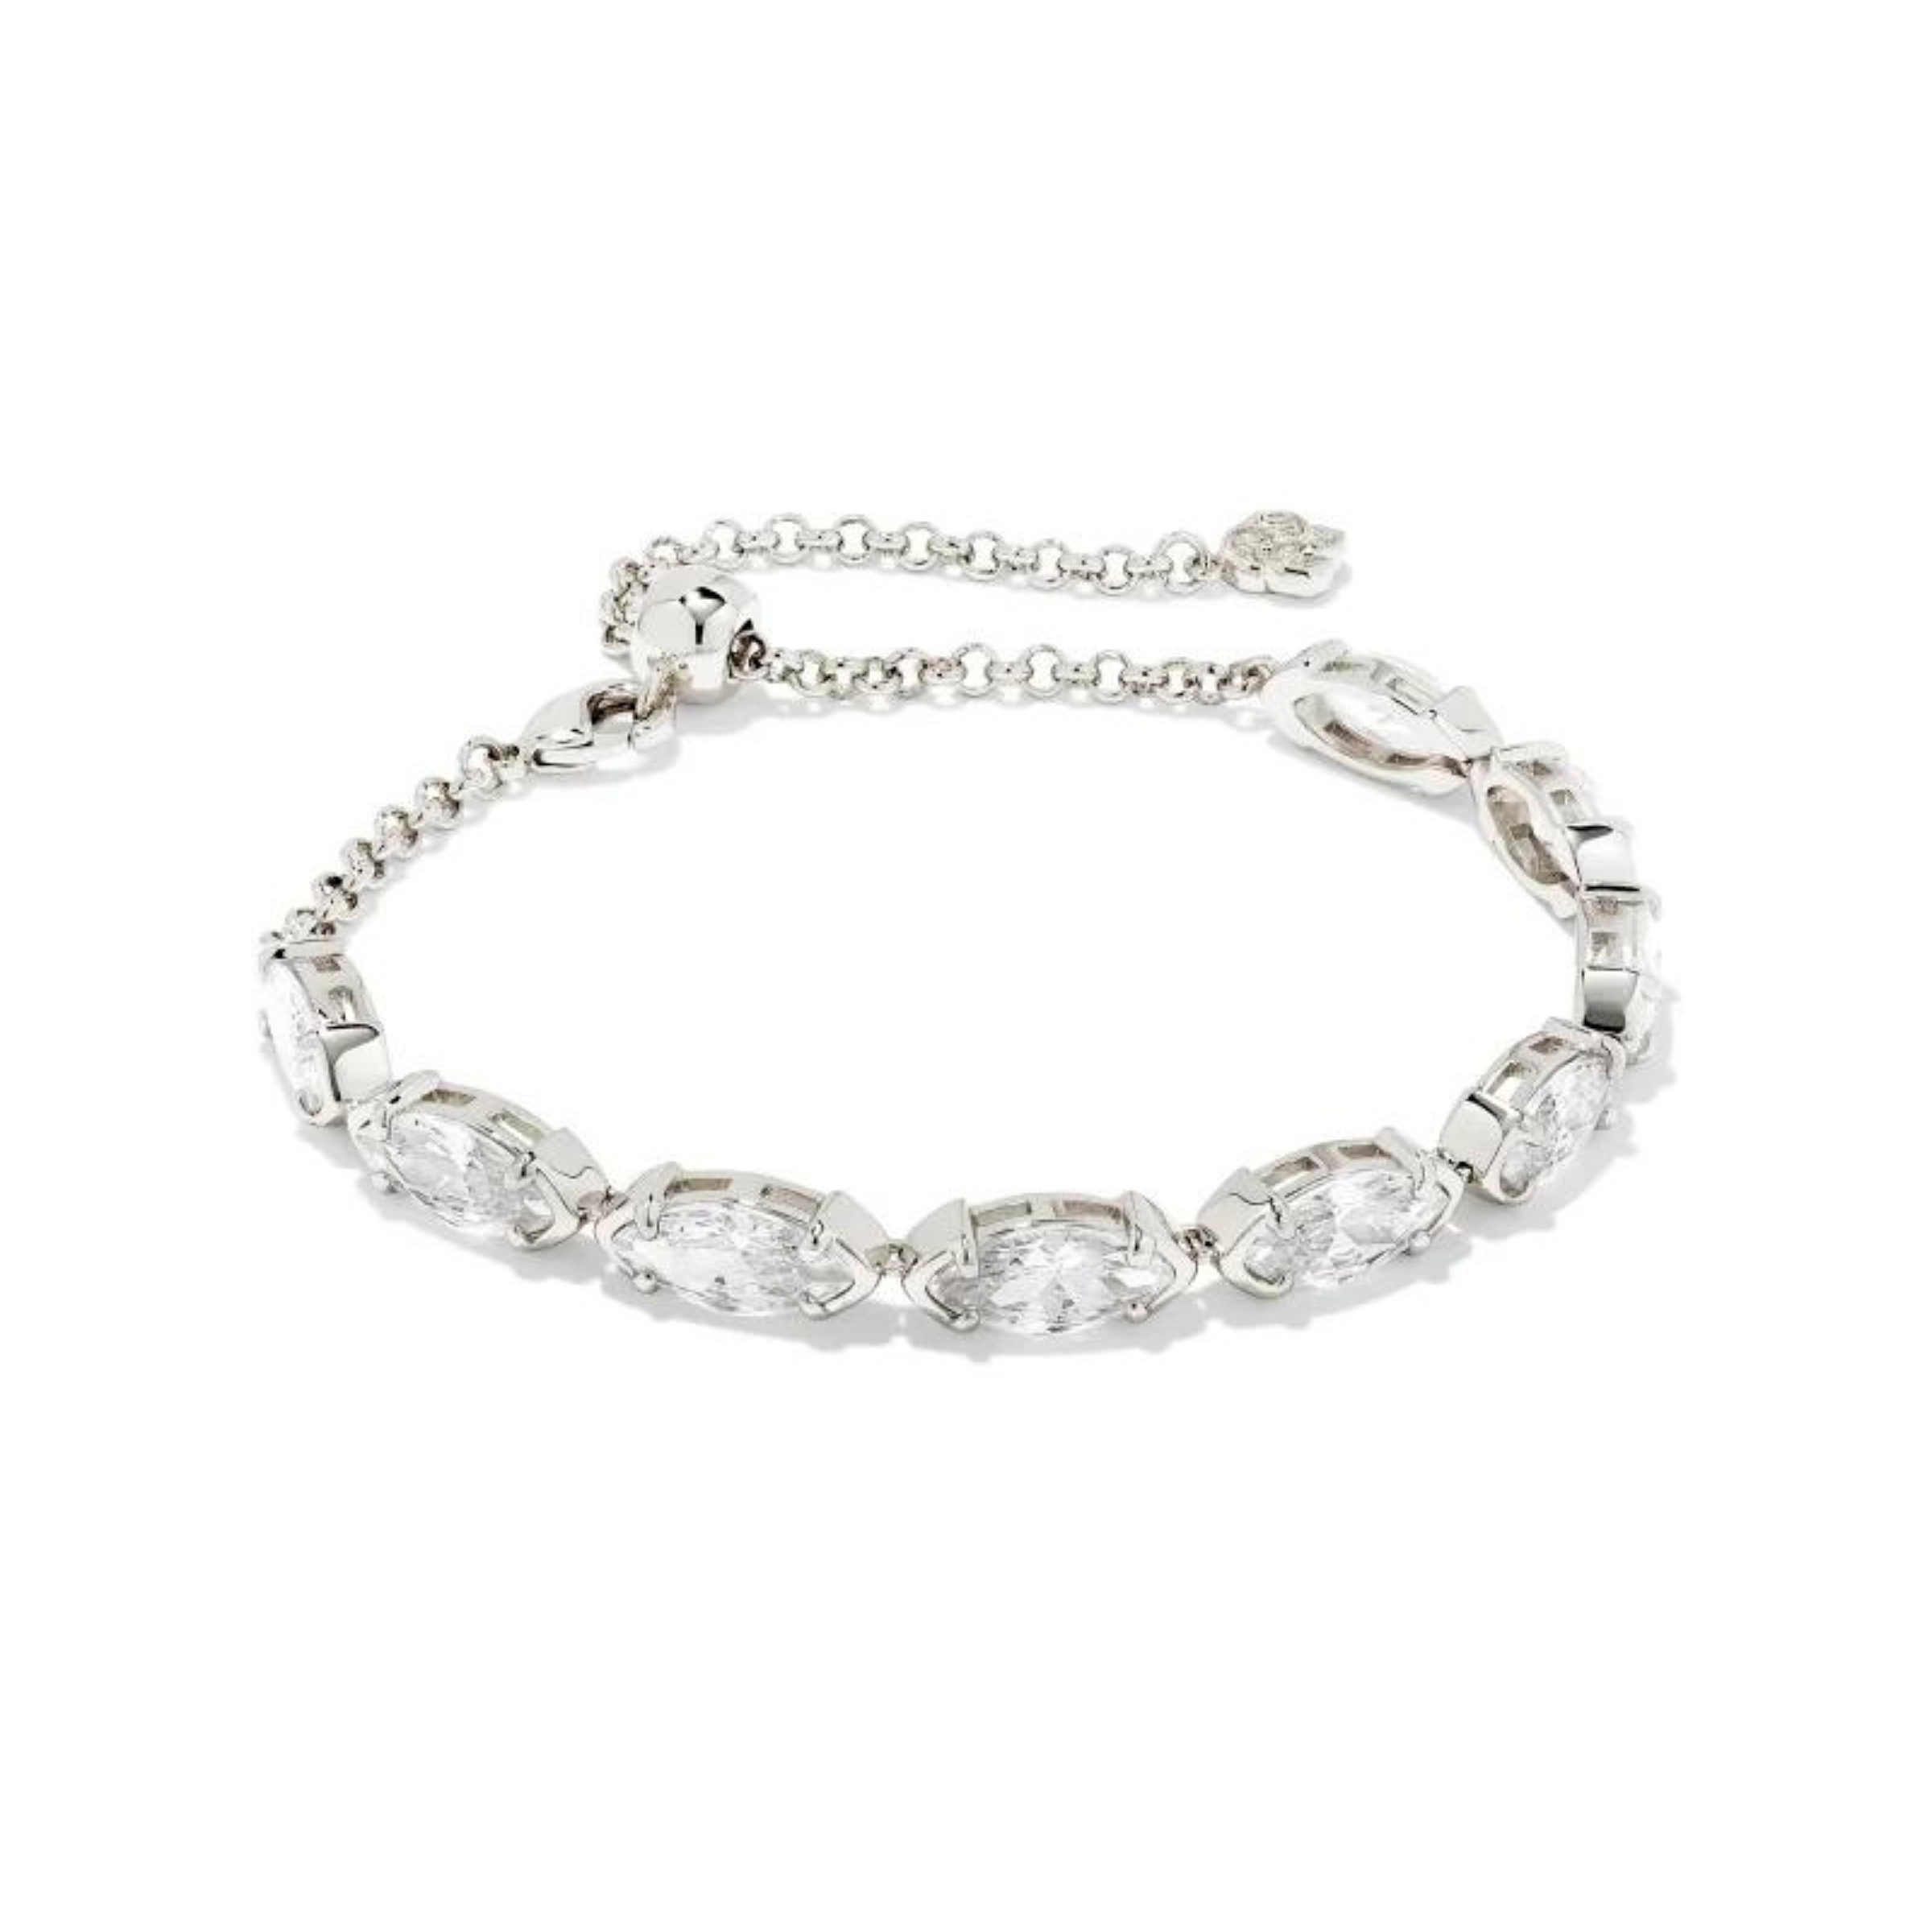 Silver tennis bracelet with clear oval crystals pictured on a white background. 